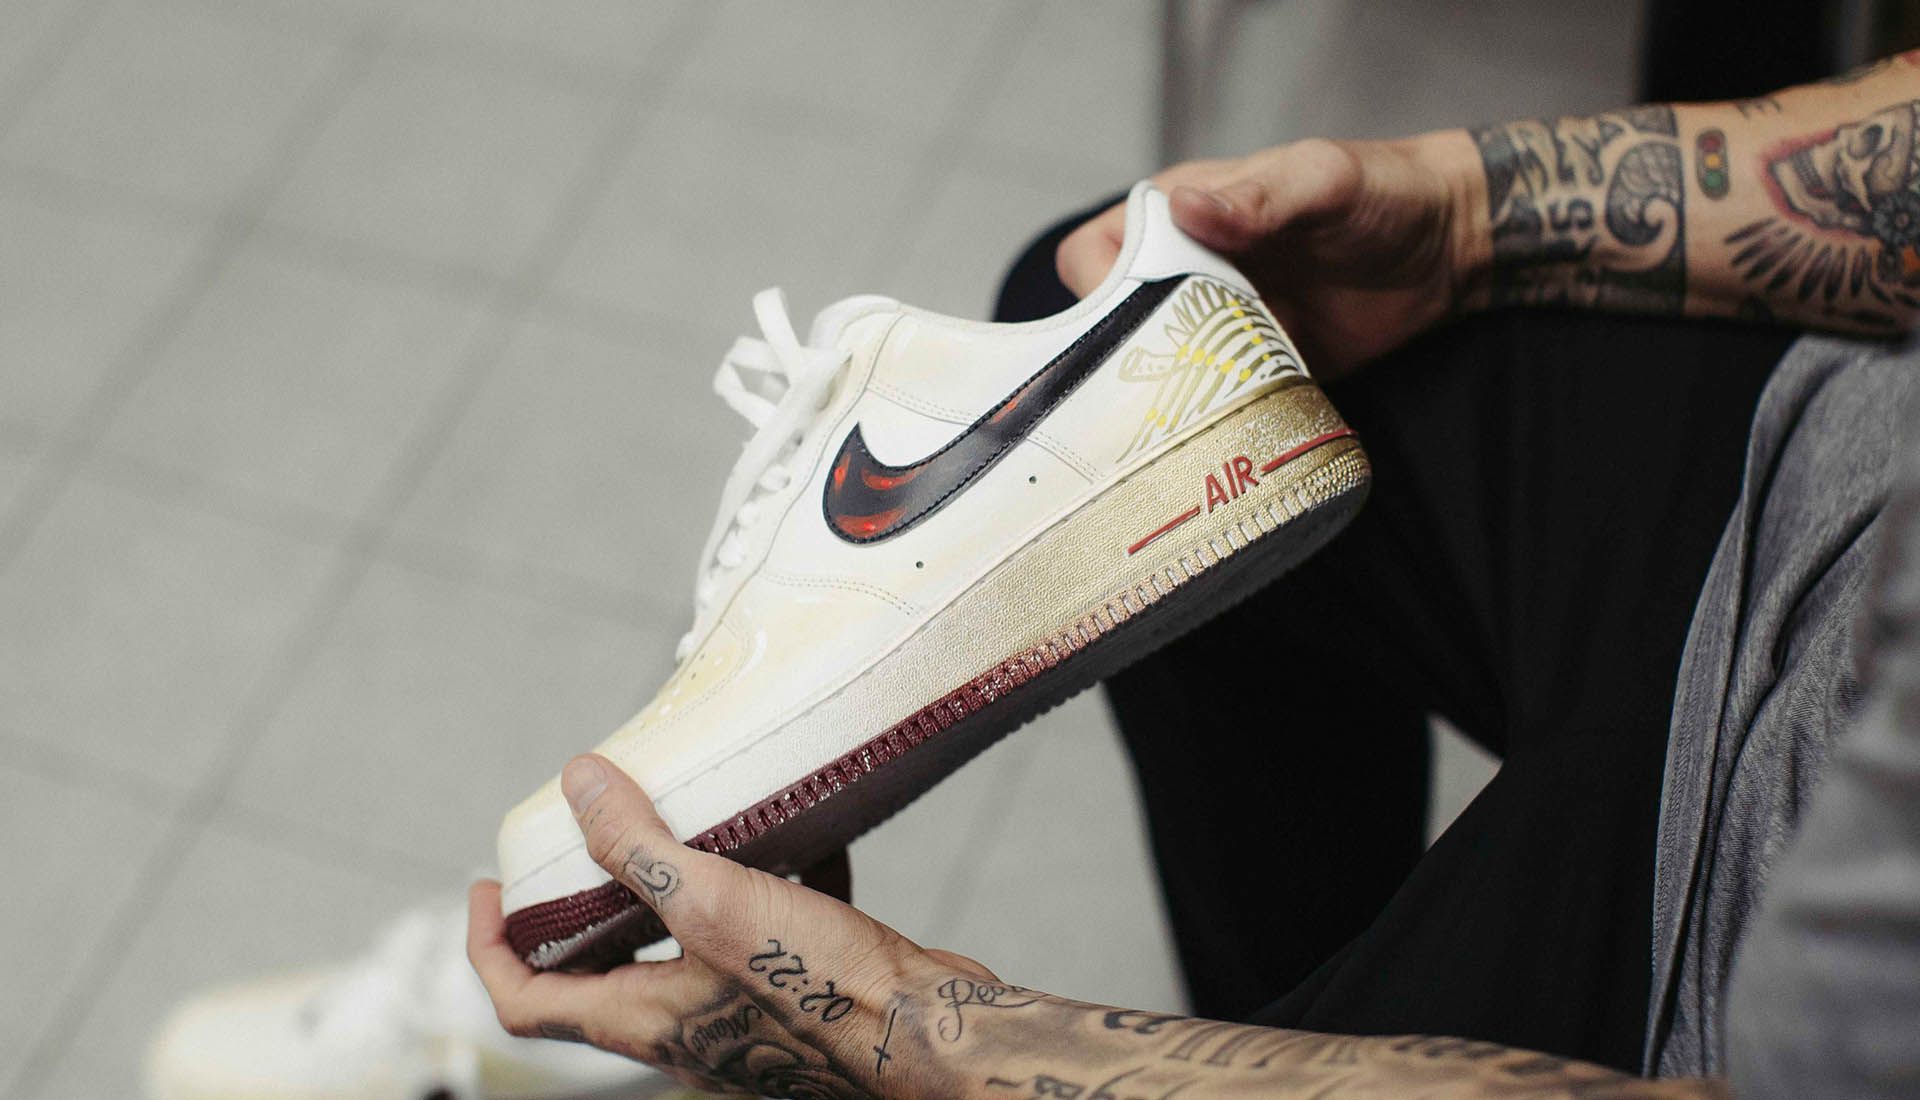 Cristiano Ronaldo is back with another exclusive Nike Air Force 1